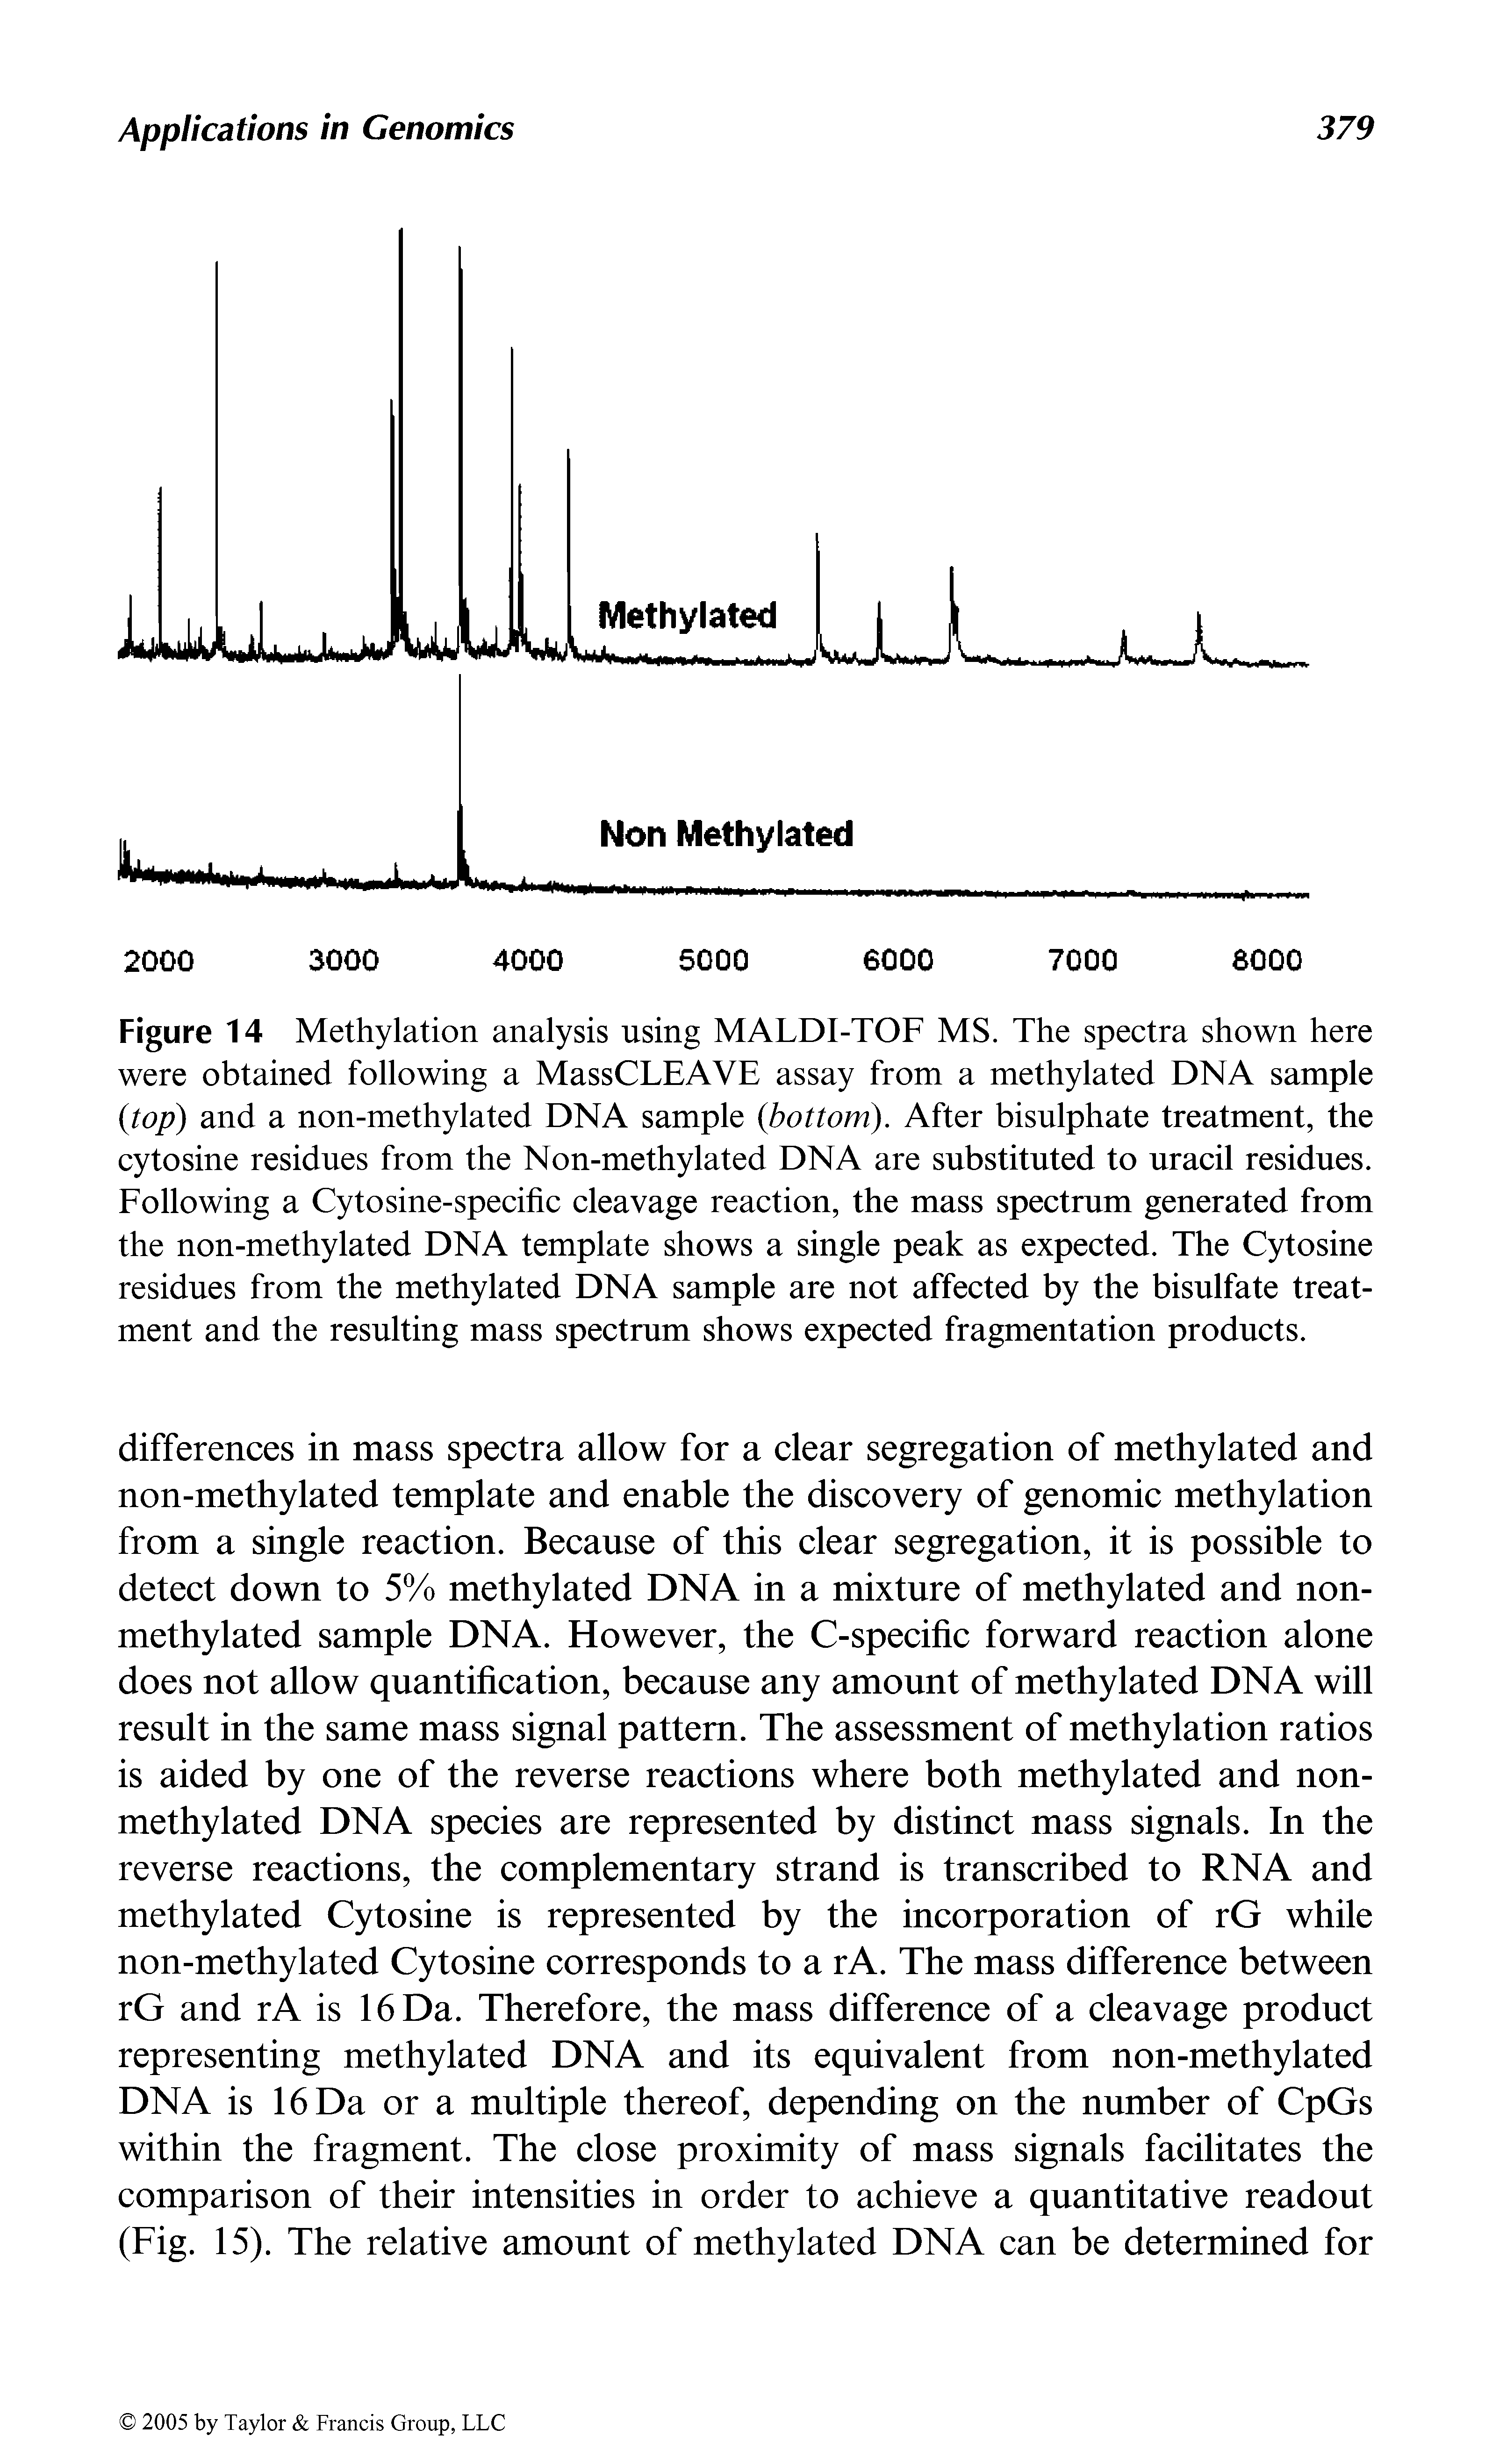 Figure 14 Methylation analysis using MALDI-TOF MS. The spectra shown here were obtained following a MassCLEAVE assay from a methylated DNA sample (top) and a non-methylated DNA sample (bottom). After bisulphate treatment, the cytosine residues from the Non-methylated DNA are substituted to uracil residues. Following a Cytosine-specific cleavage reaction, the mass spectrum generated from the non-methylated DNA template shows a single peak as expected. The Cytosine residues from the methylated DNA sample are not affected by the bisulfate treatment and the resulting mass spectrum shows expected fragmentation products.